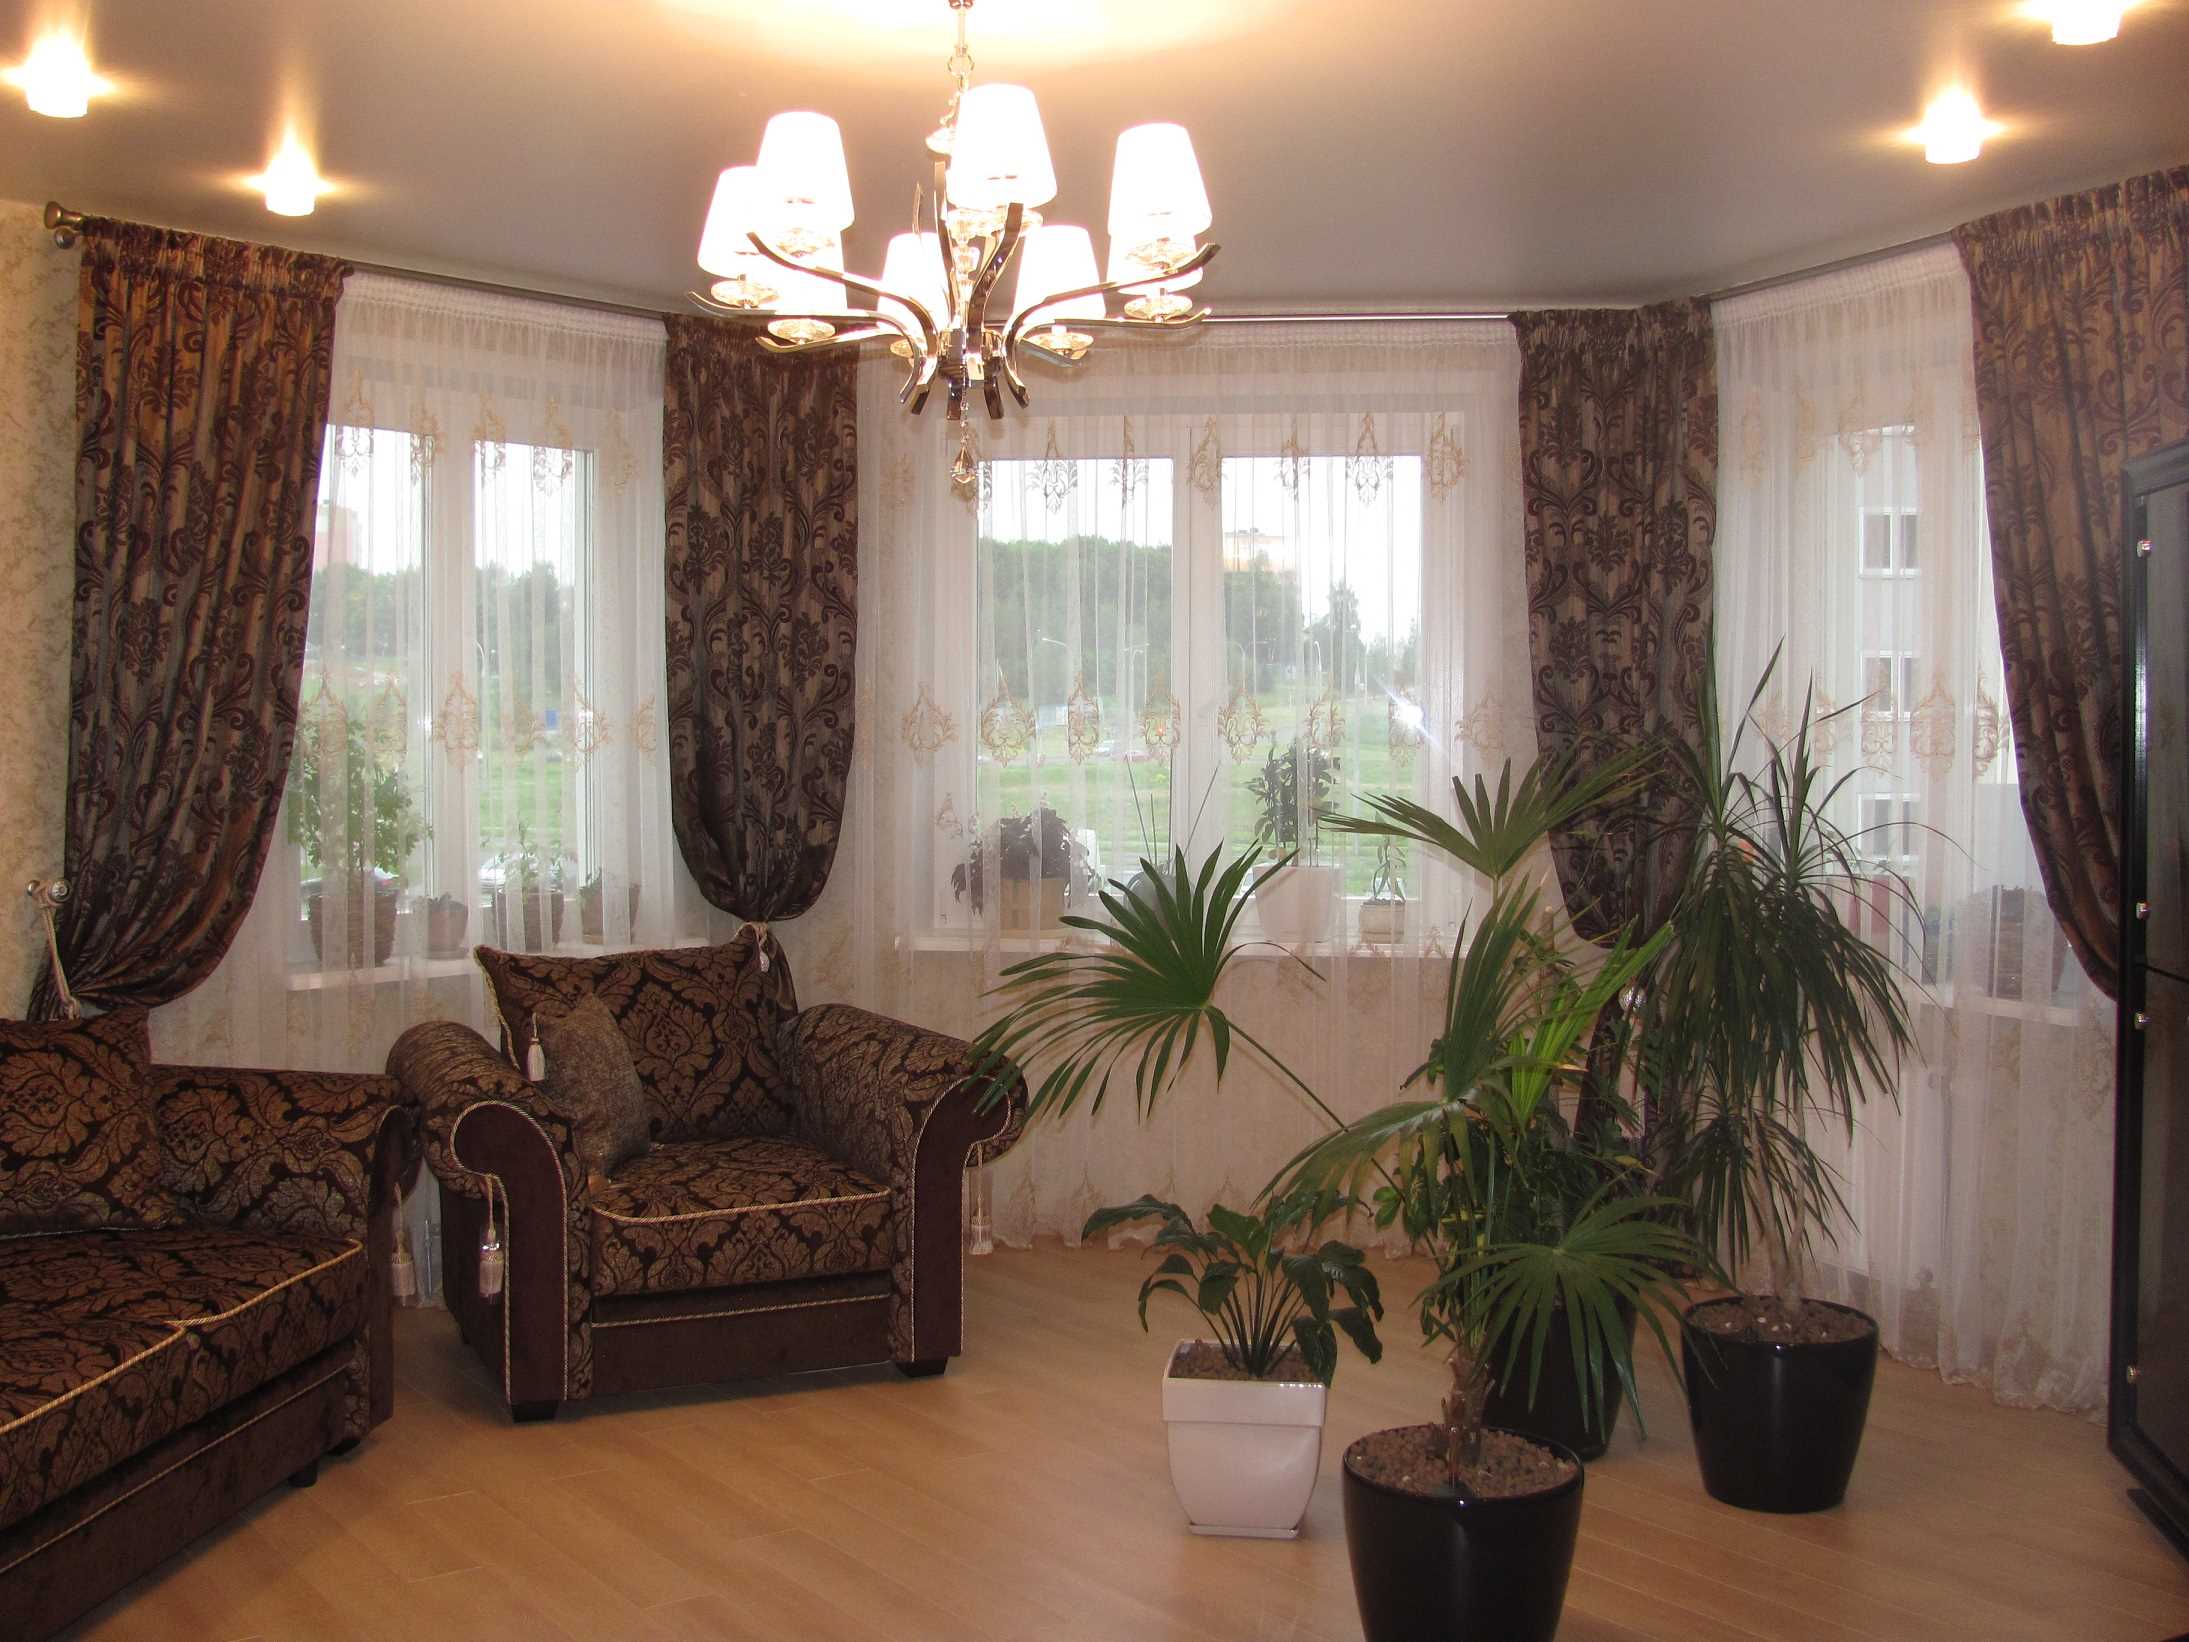 An example of a beautiful living room interior with a bay window